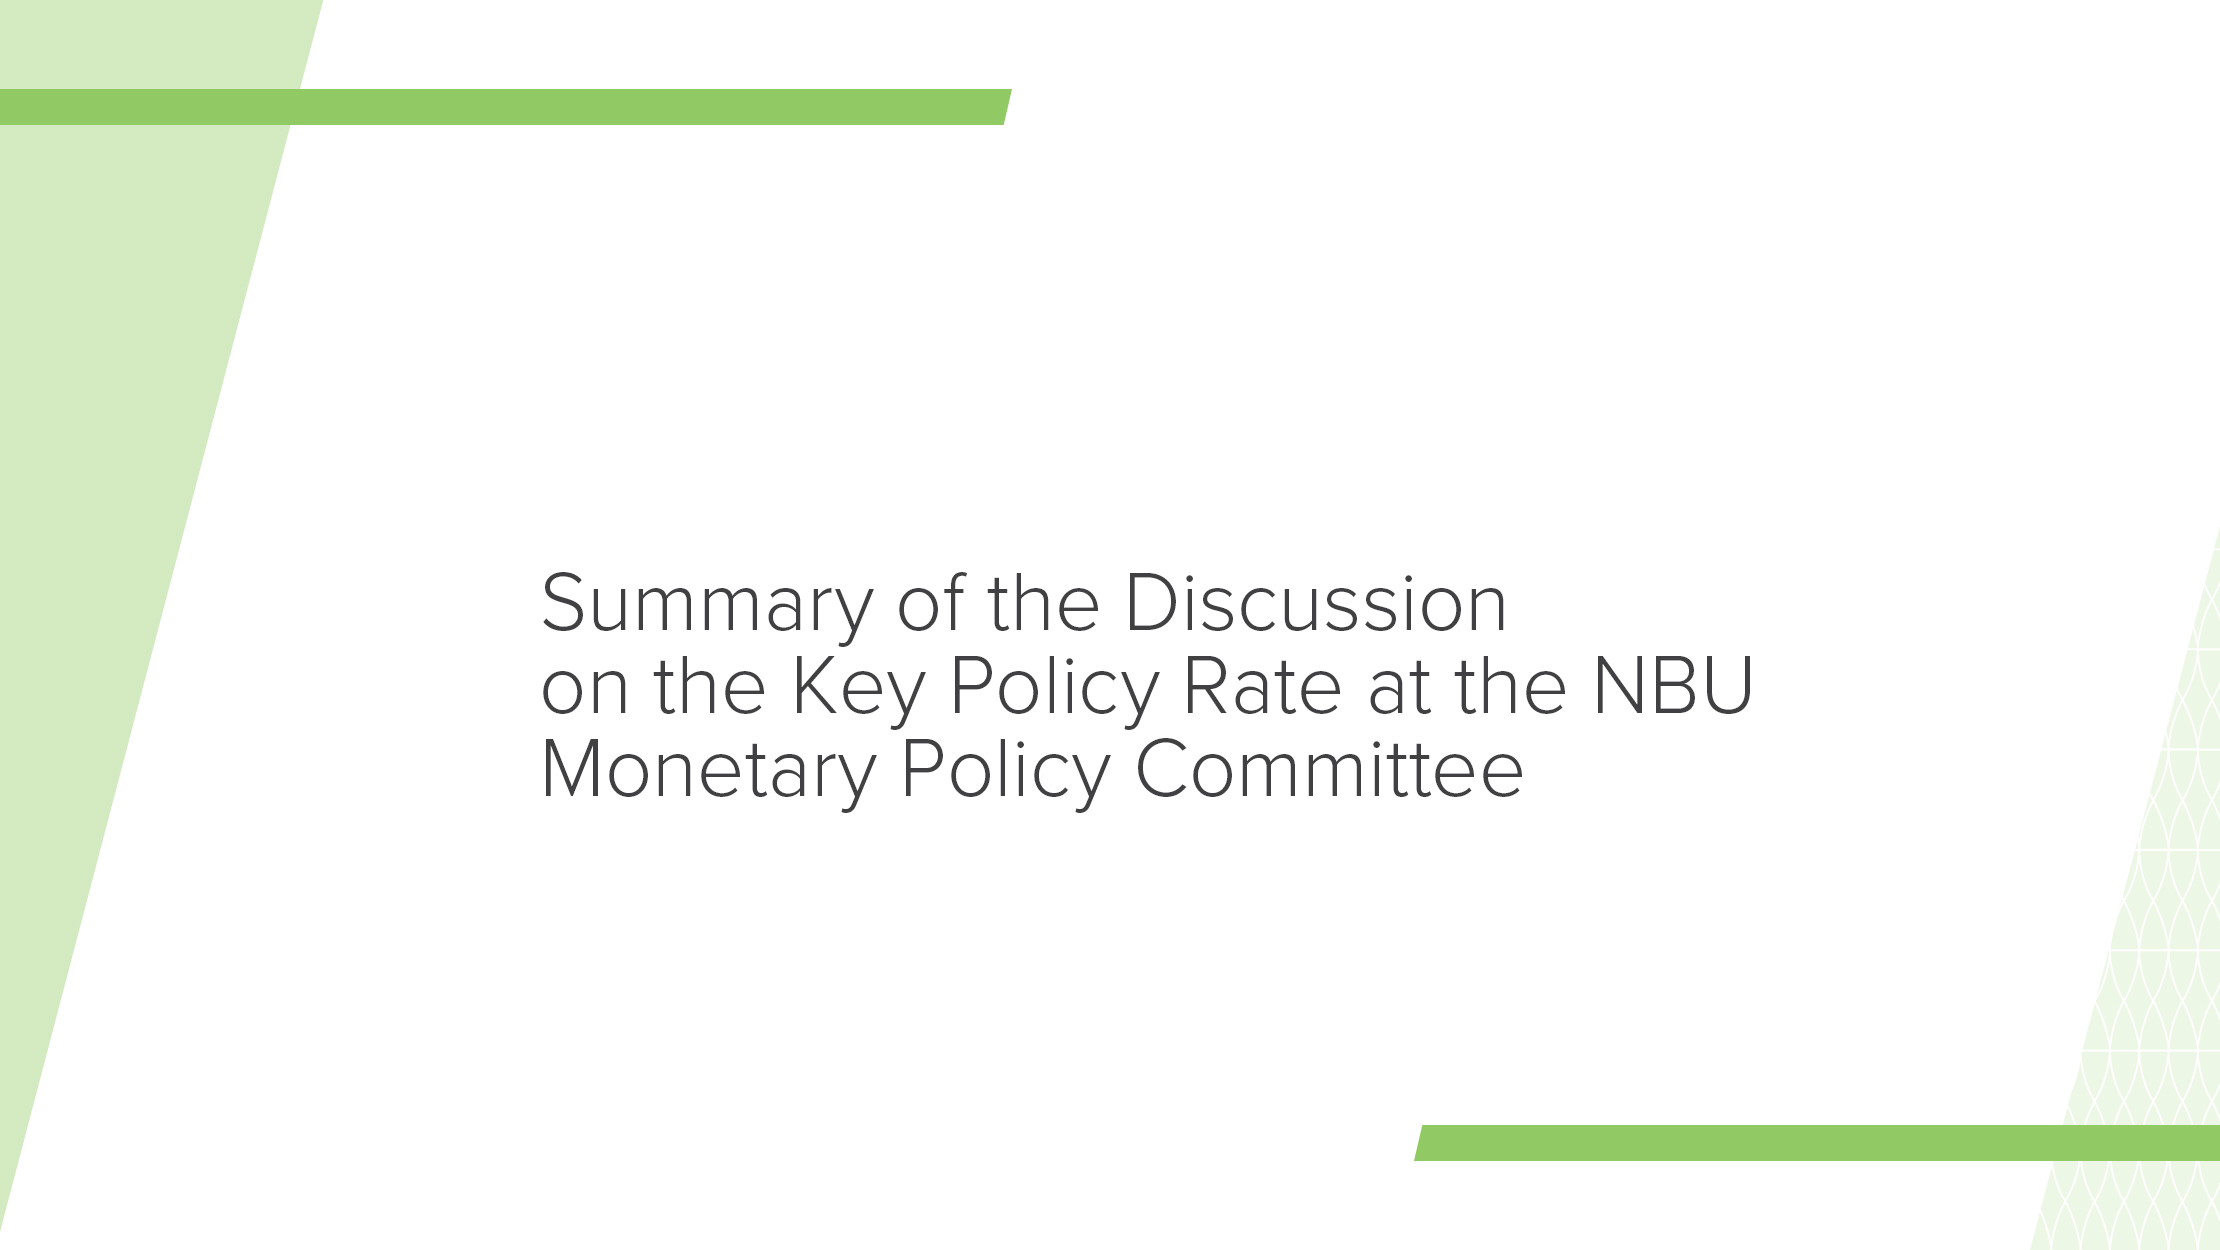 Summary of Key Policy Rate Discussion by NBU Monetary Policy Committee on 14 April 2021